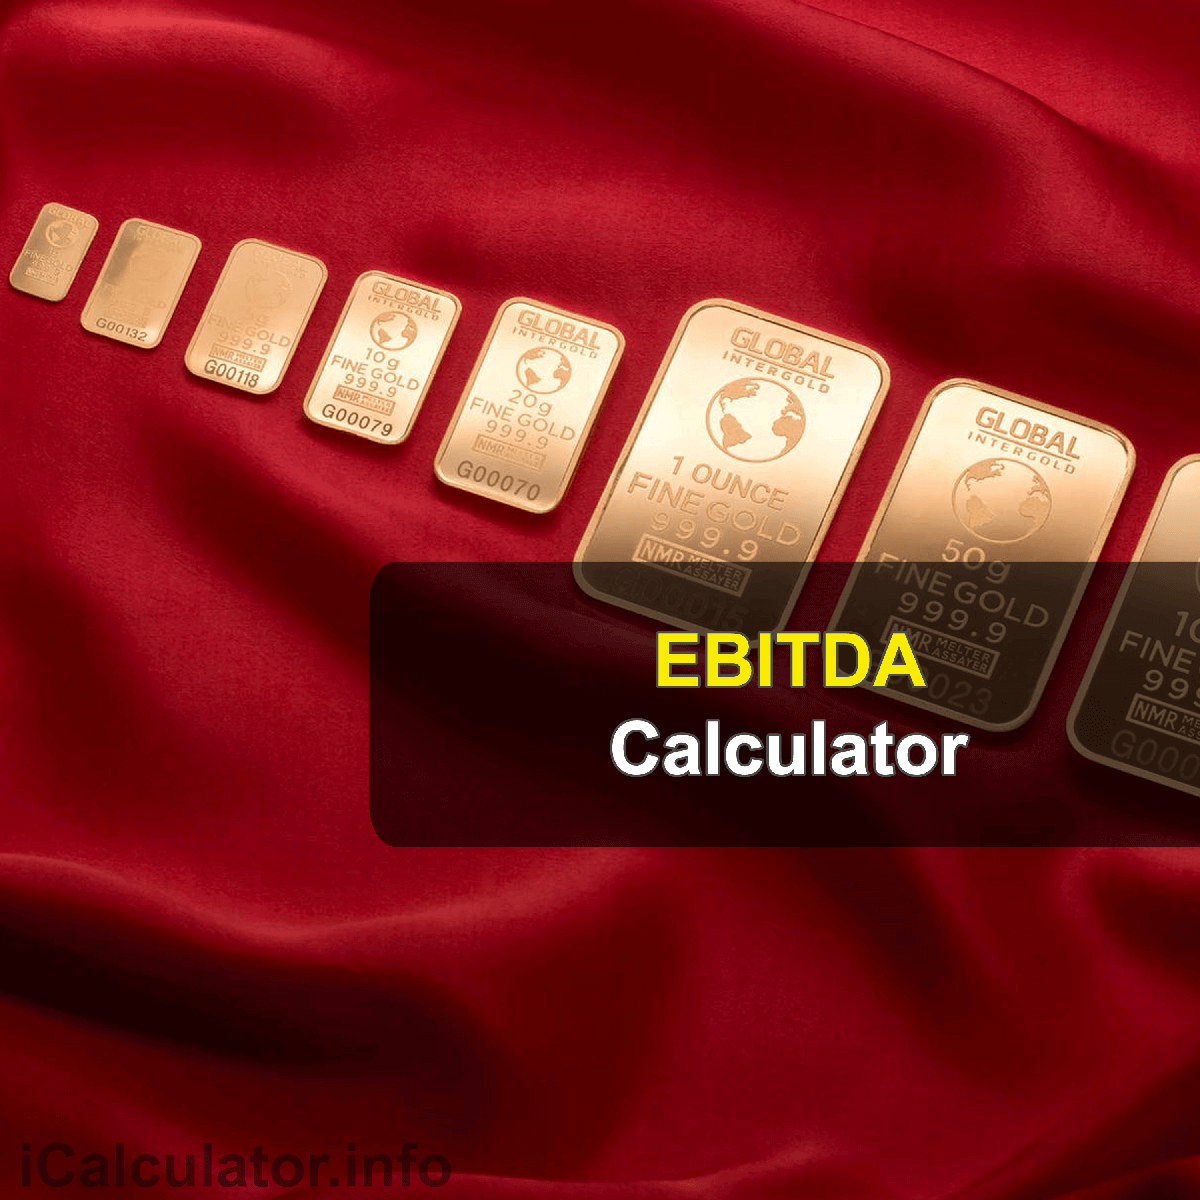 EBITDA Calculator. This image provides details of how to calculate the earnings before interest, taxes, depreciation and amortization using a calculator and notepad. By using the EBITDA model formula, the EBITDA Calculator provides a true calculation of the current value of a company's stock is the sum of all its future dividend payments when discounted back to their present value.